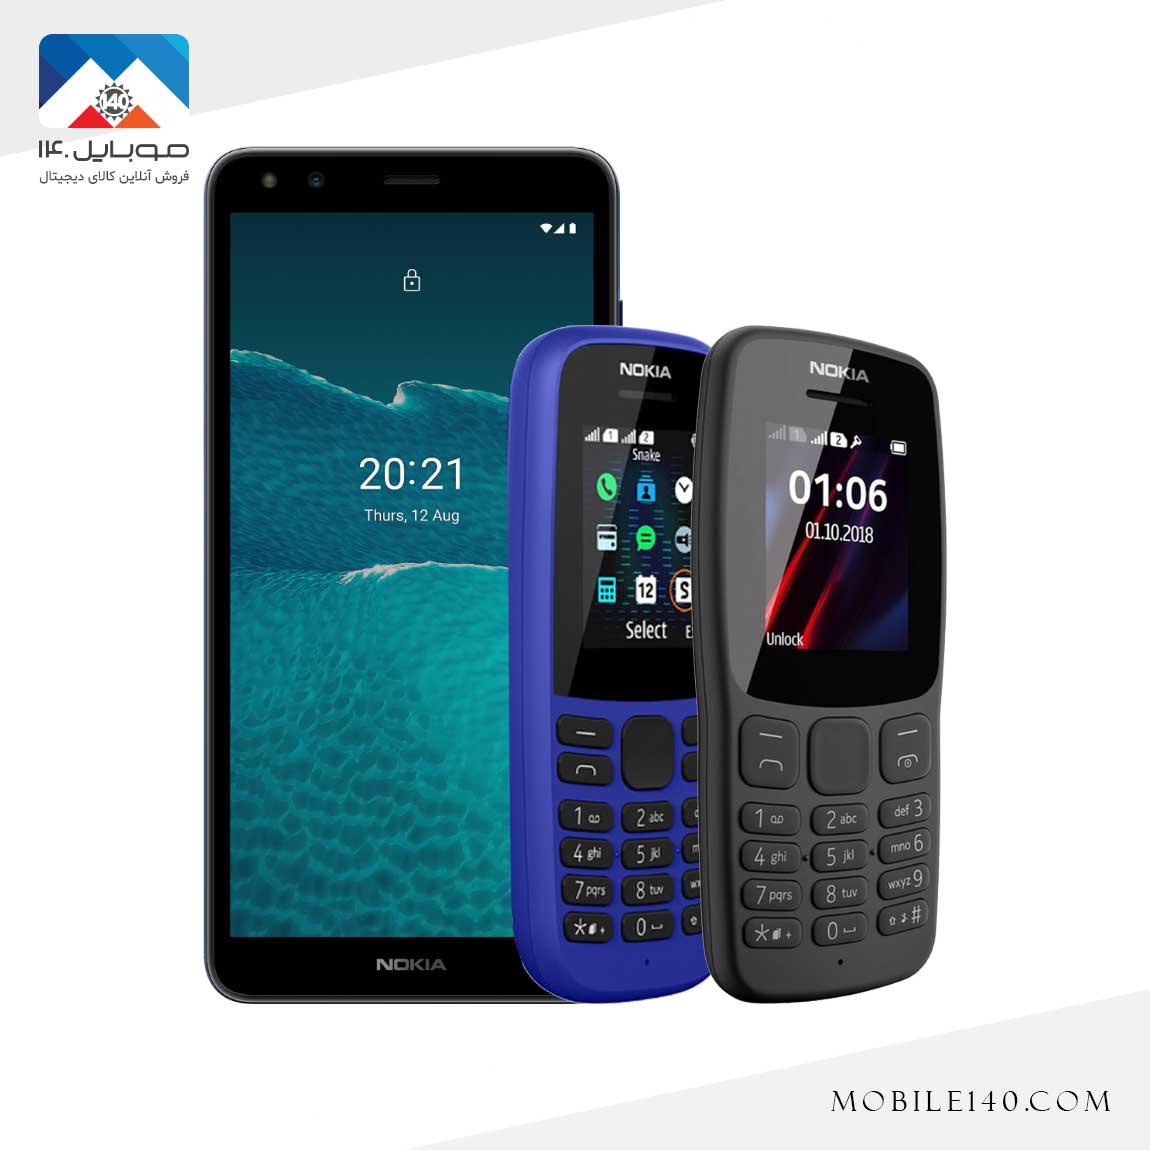 Nokia pack includes 2